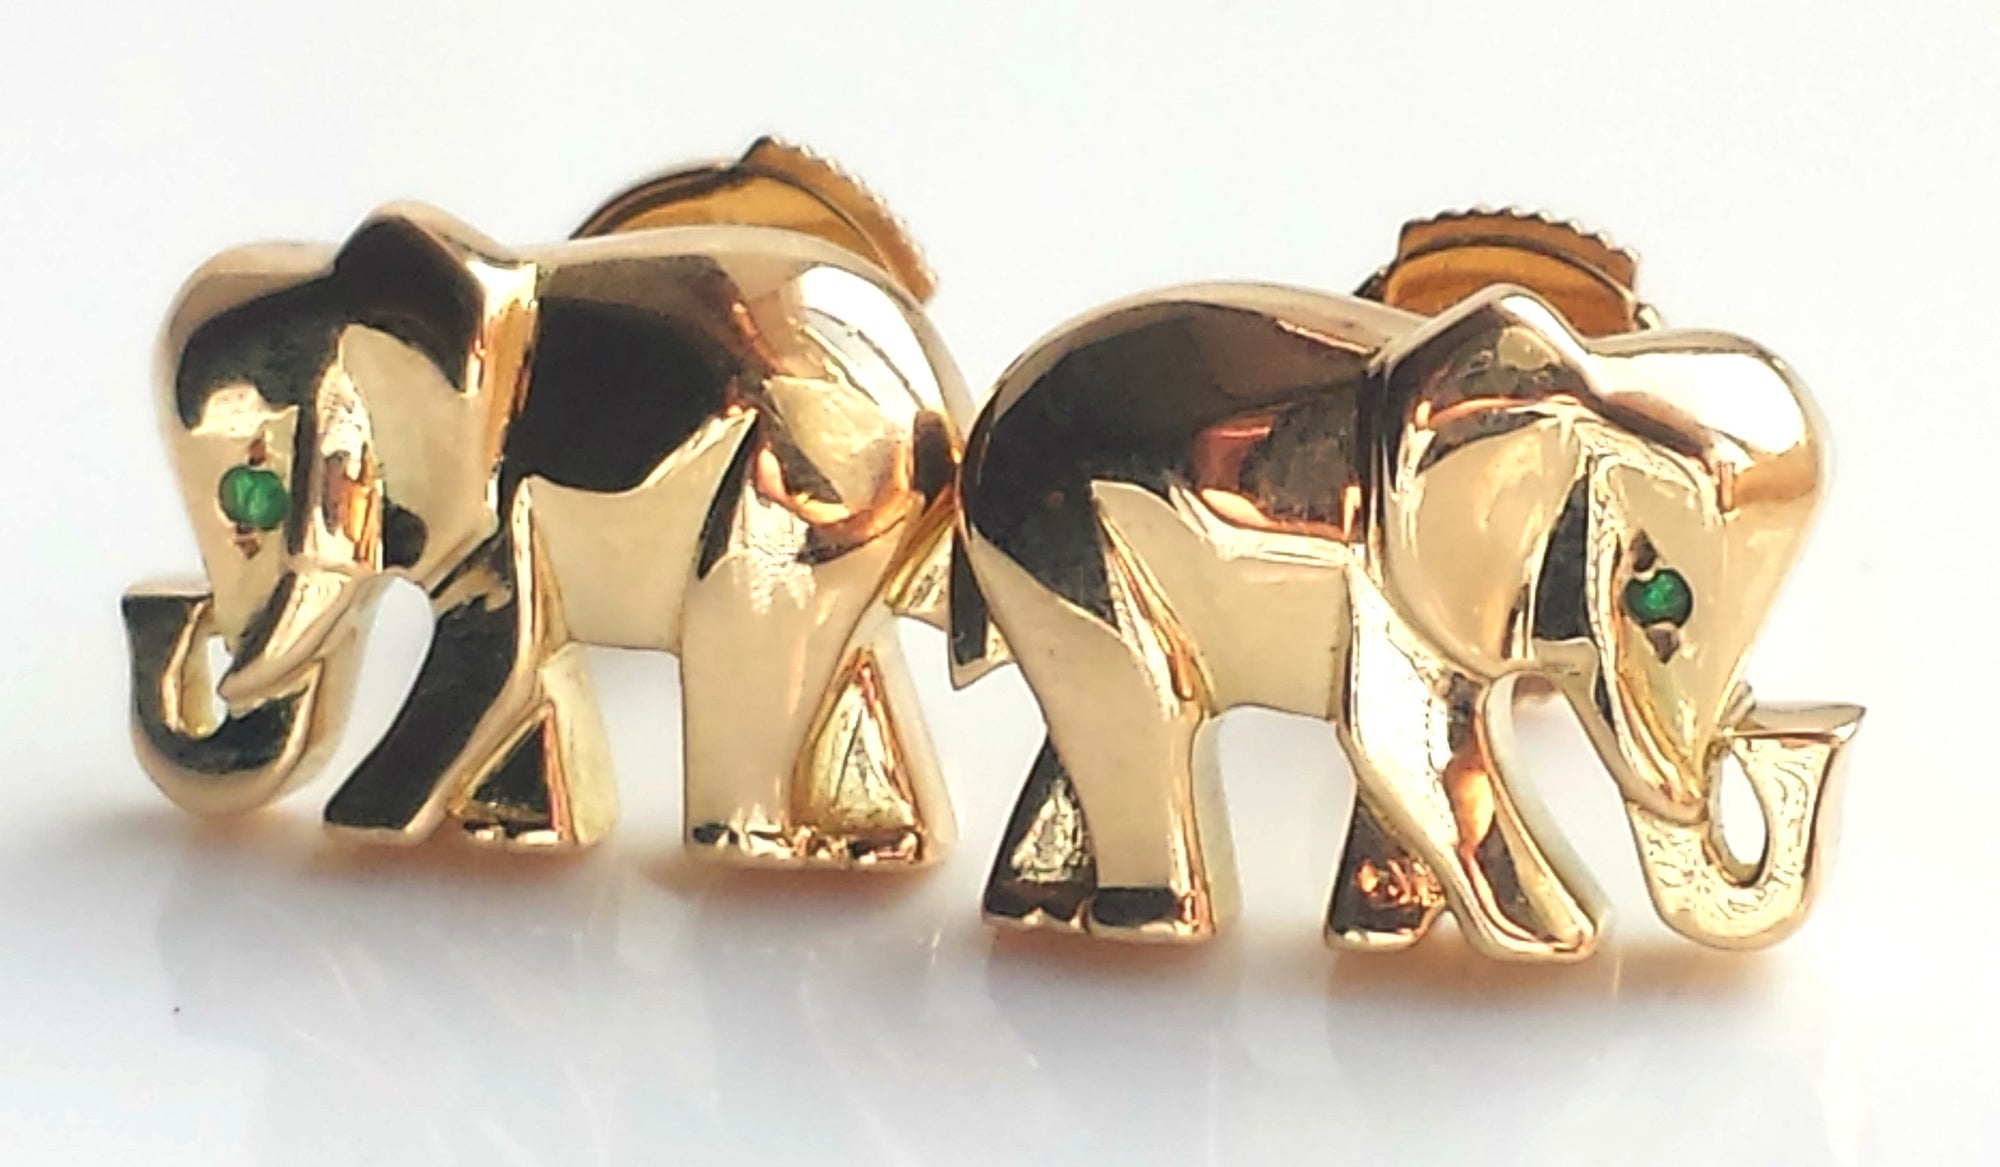 Cartier Elephant Stud Earrings in 18k Yellow Gold with Emeralds – Khandy Collection